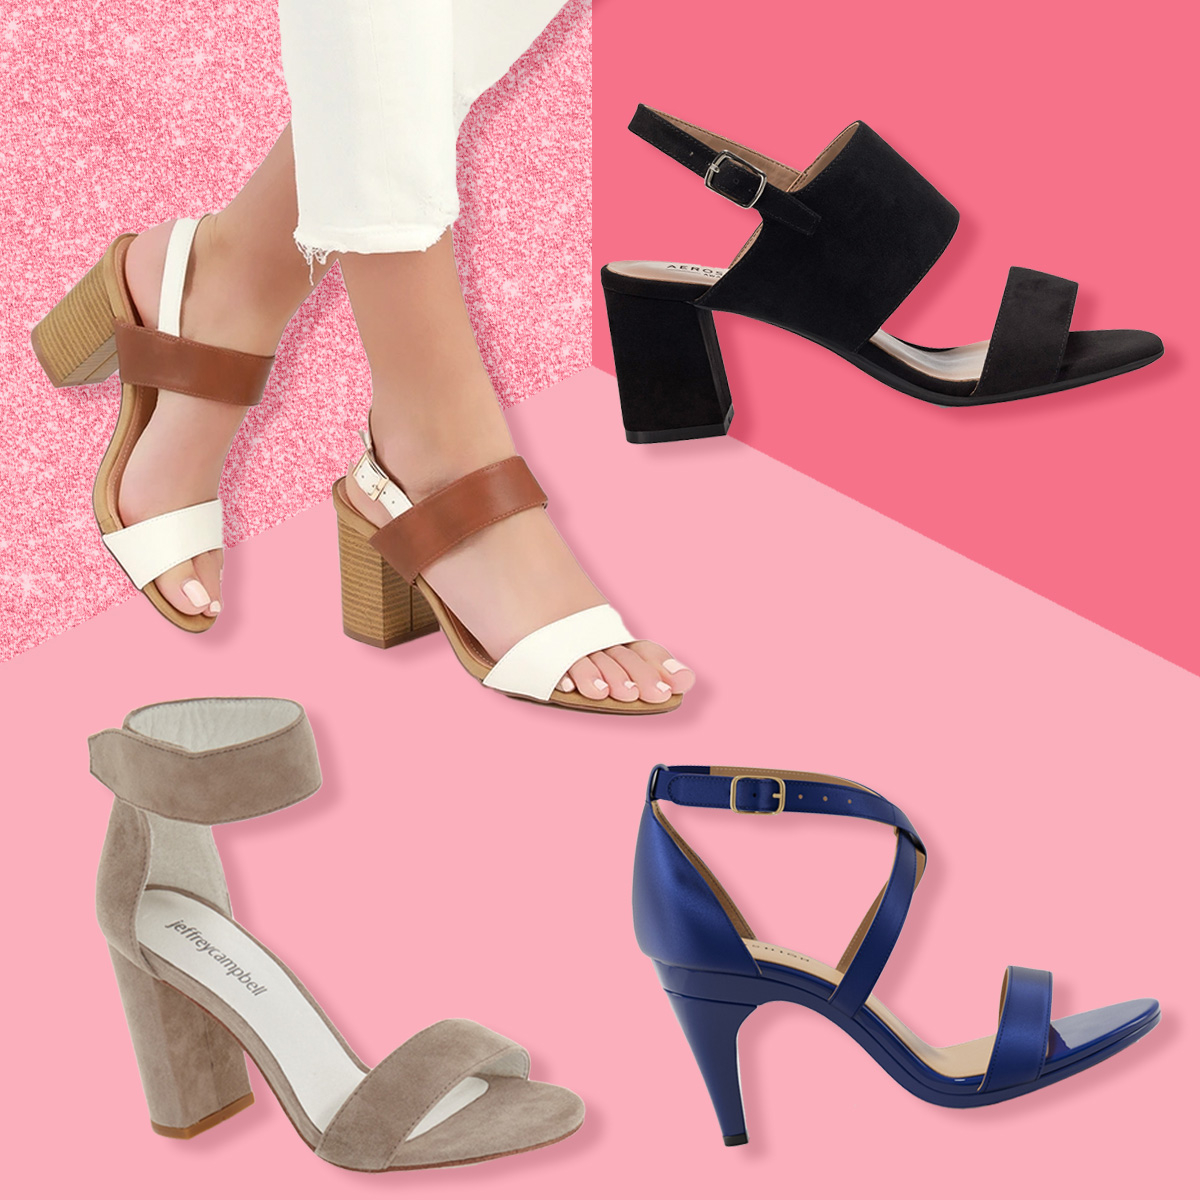 12 Comfy Heels You'll Actually Want to Wear All Day - E! Online - UK